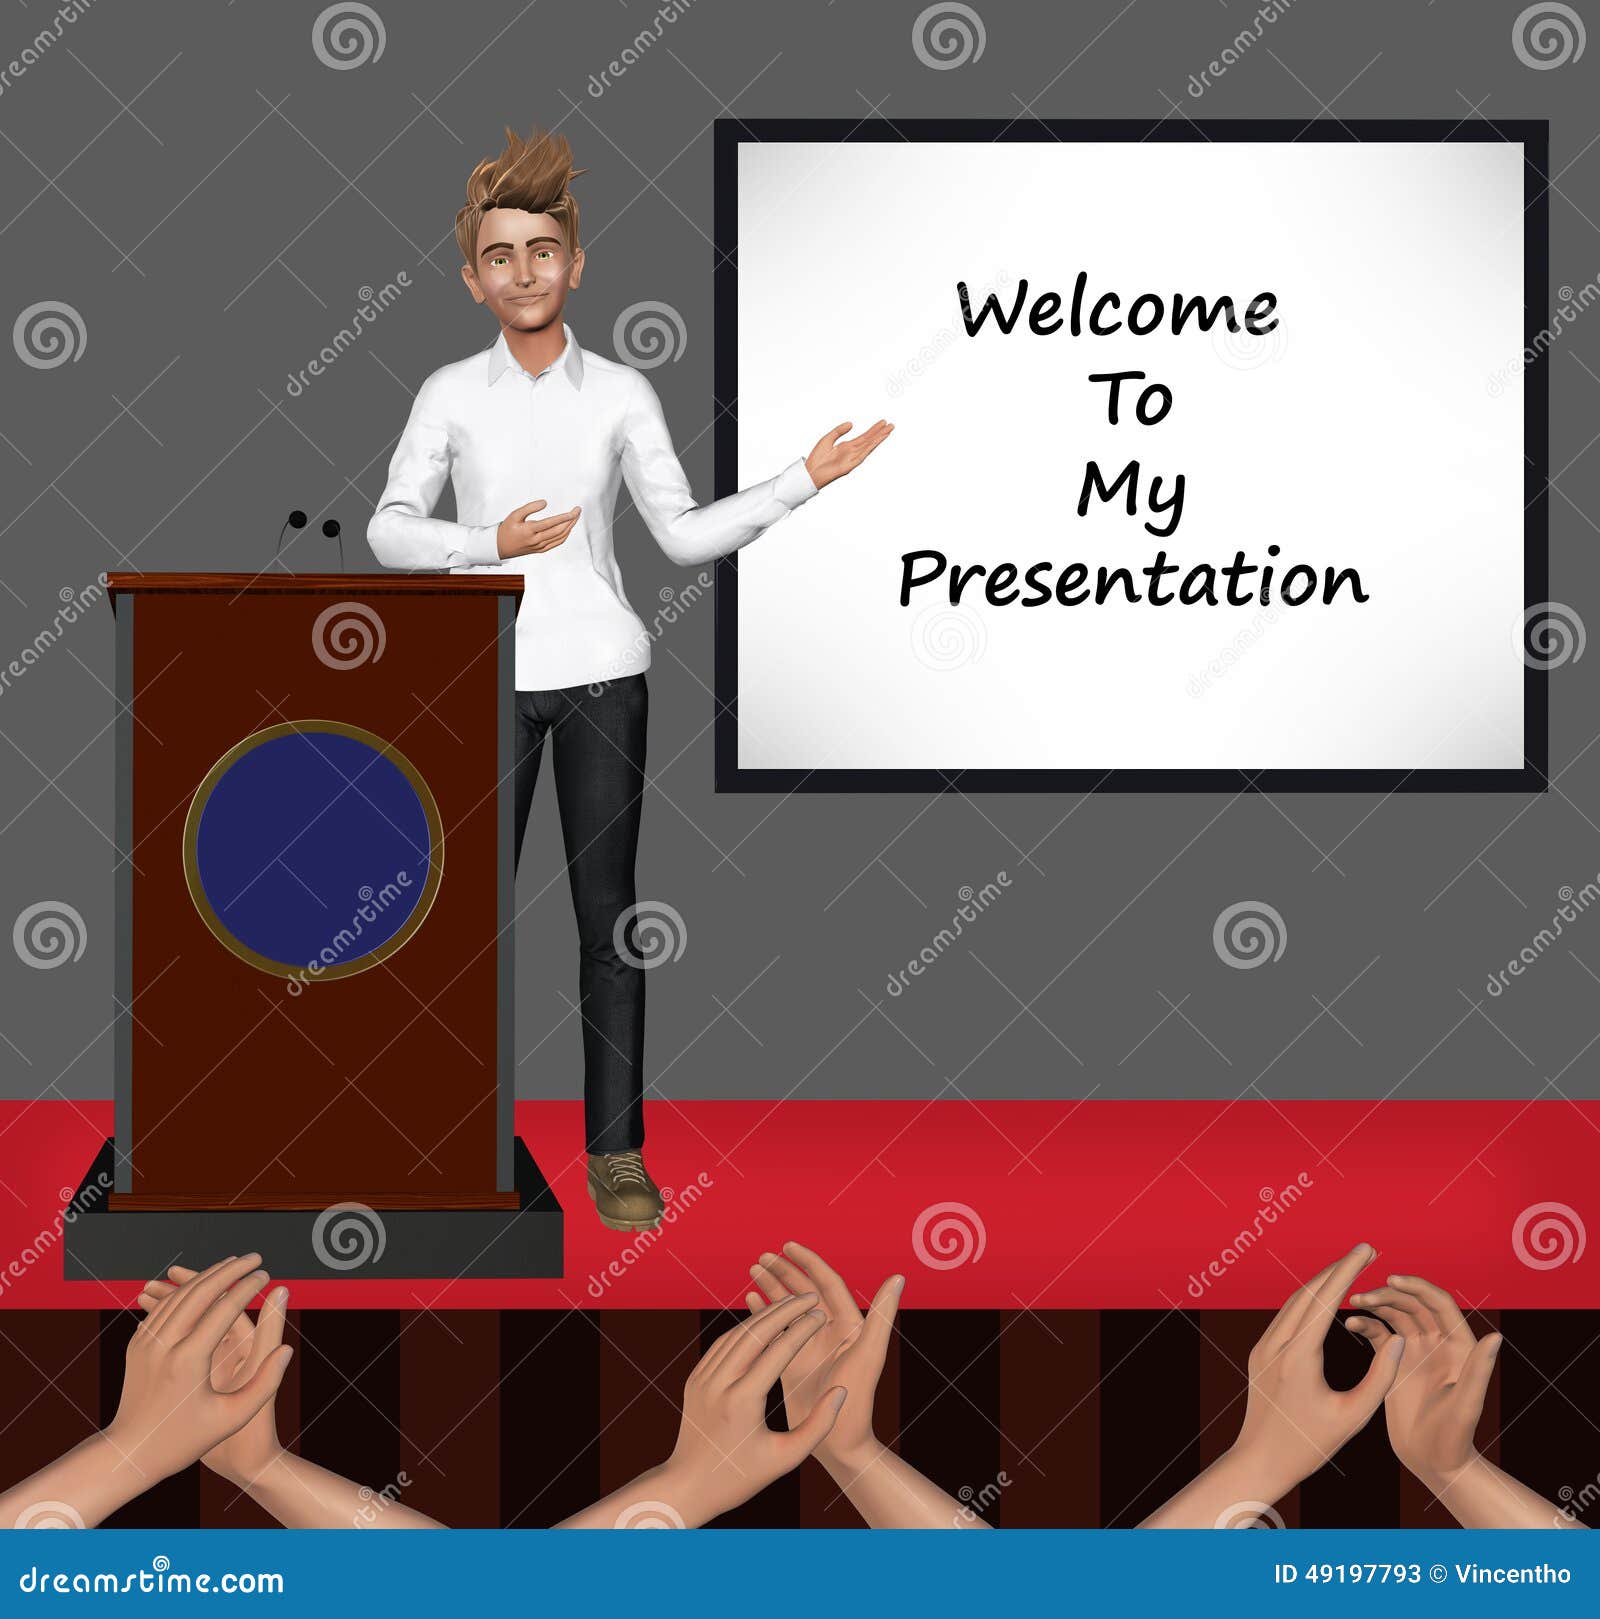 Welcome To My Presentation Illustration Stock Illustration - Illustration  of introduction, product: 49197793